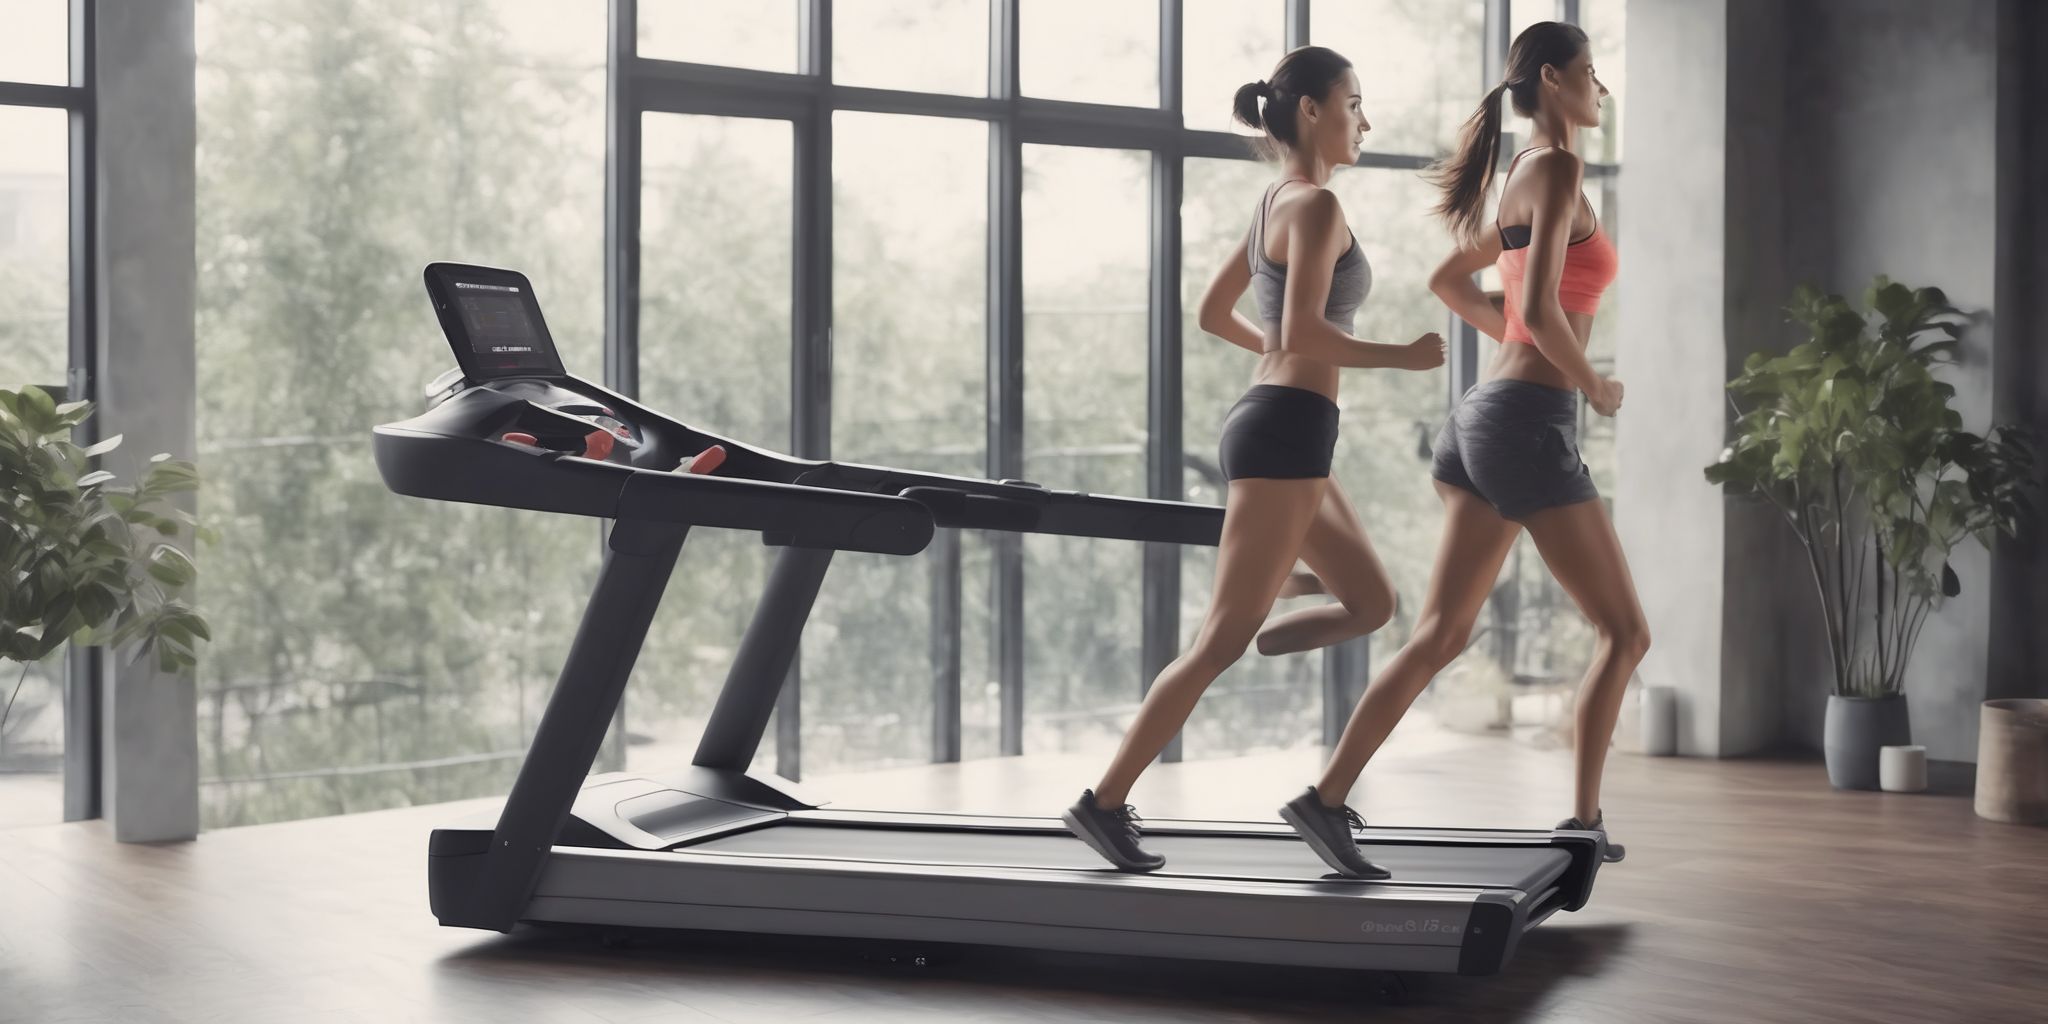 Treadmill  in realistic, photographic style